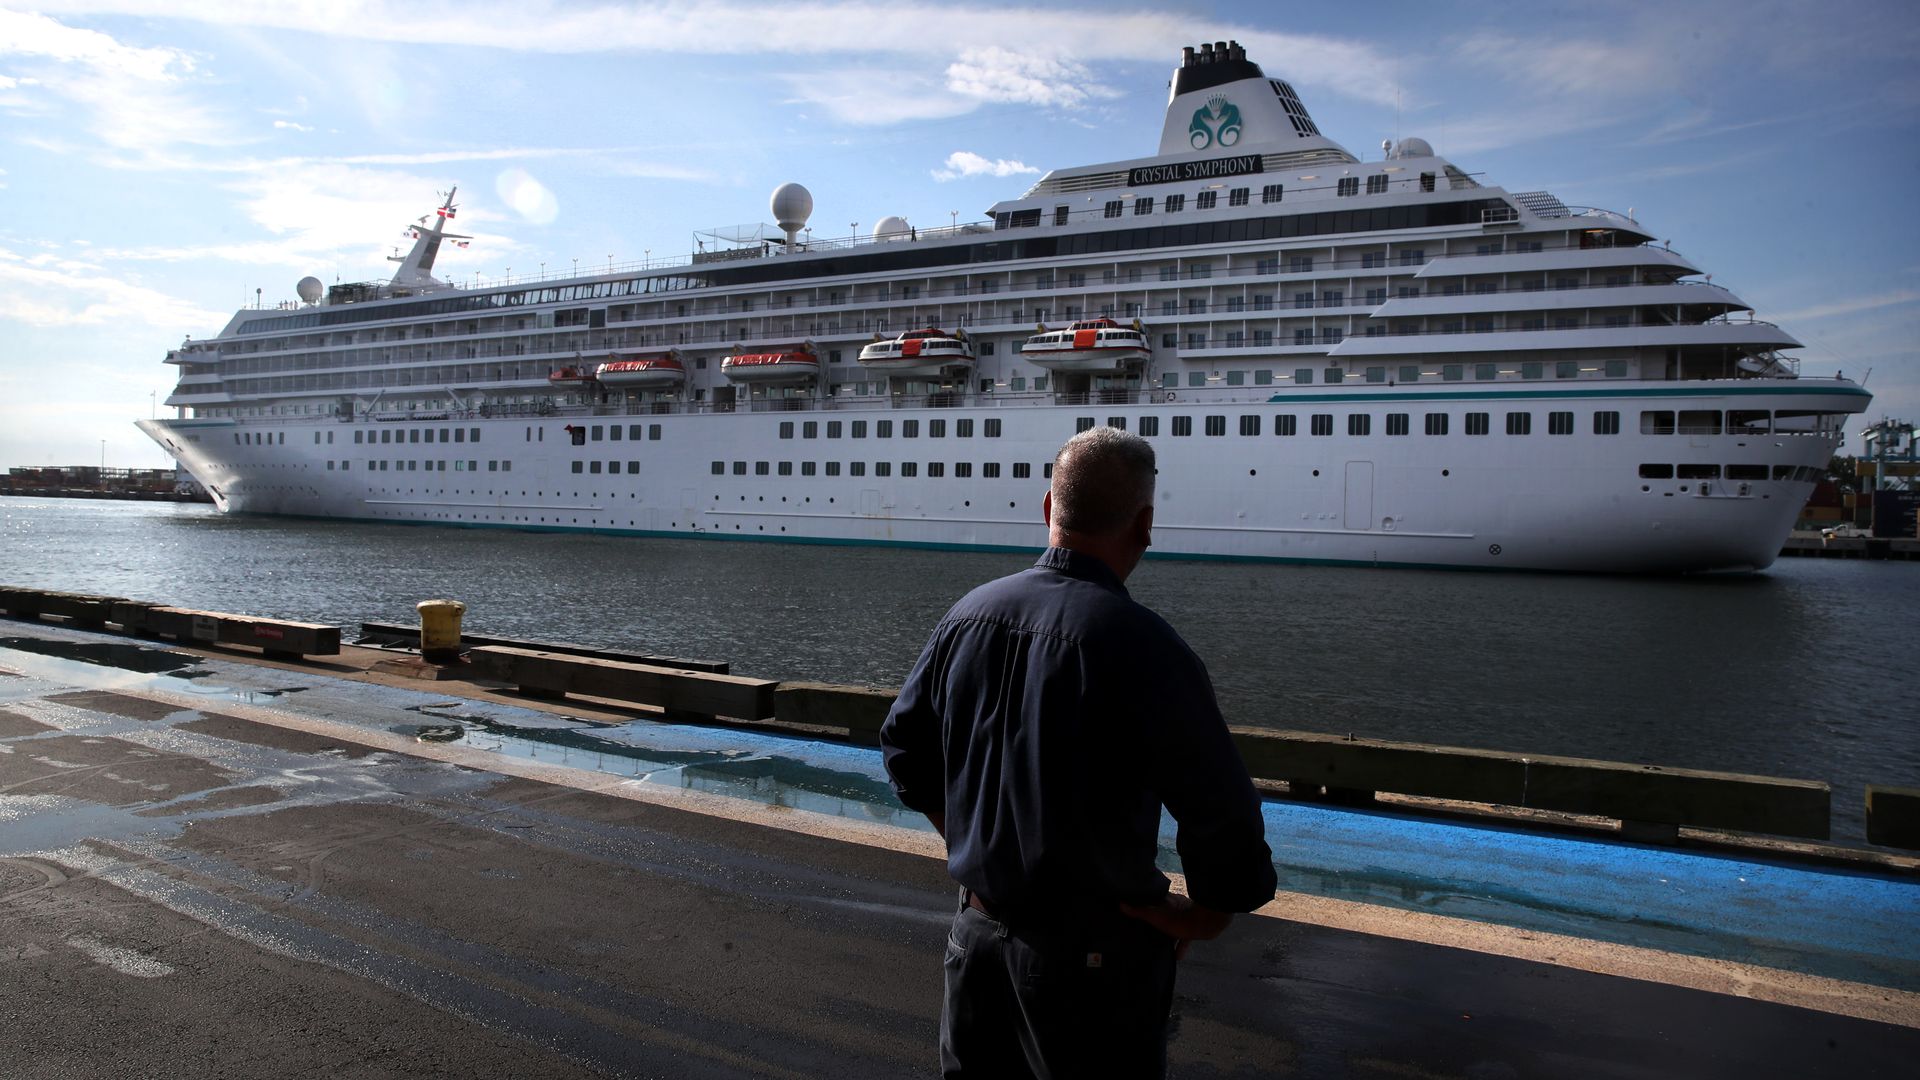 A man stands on a dock watching a cruise ship in the water